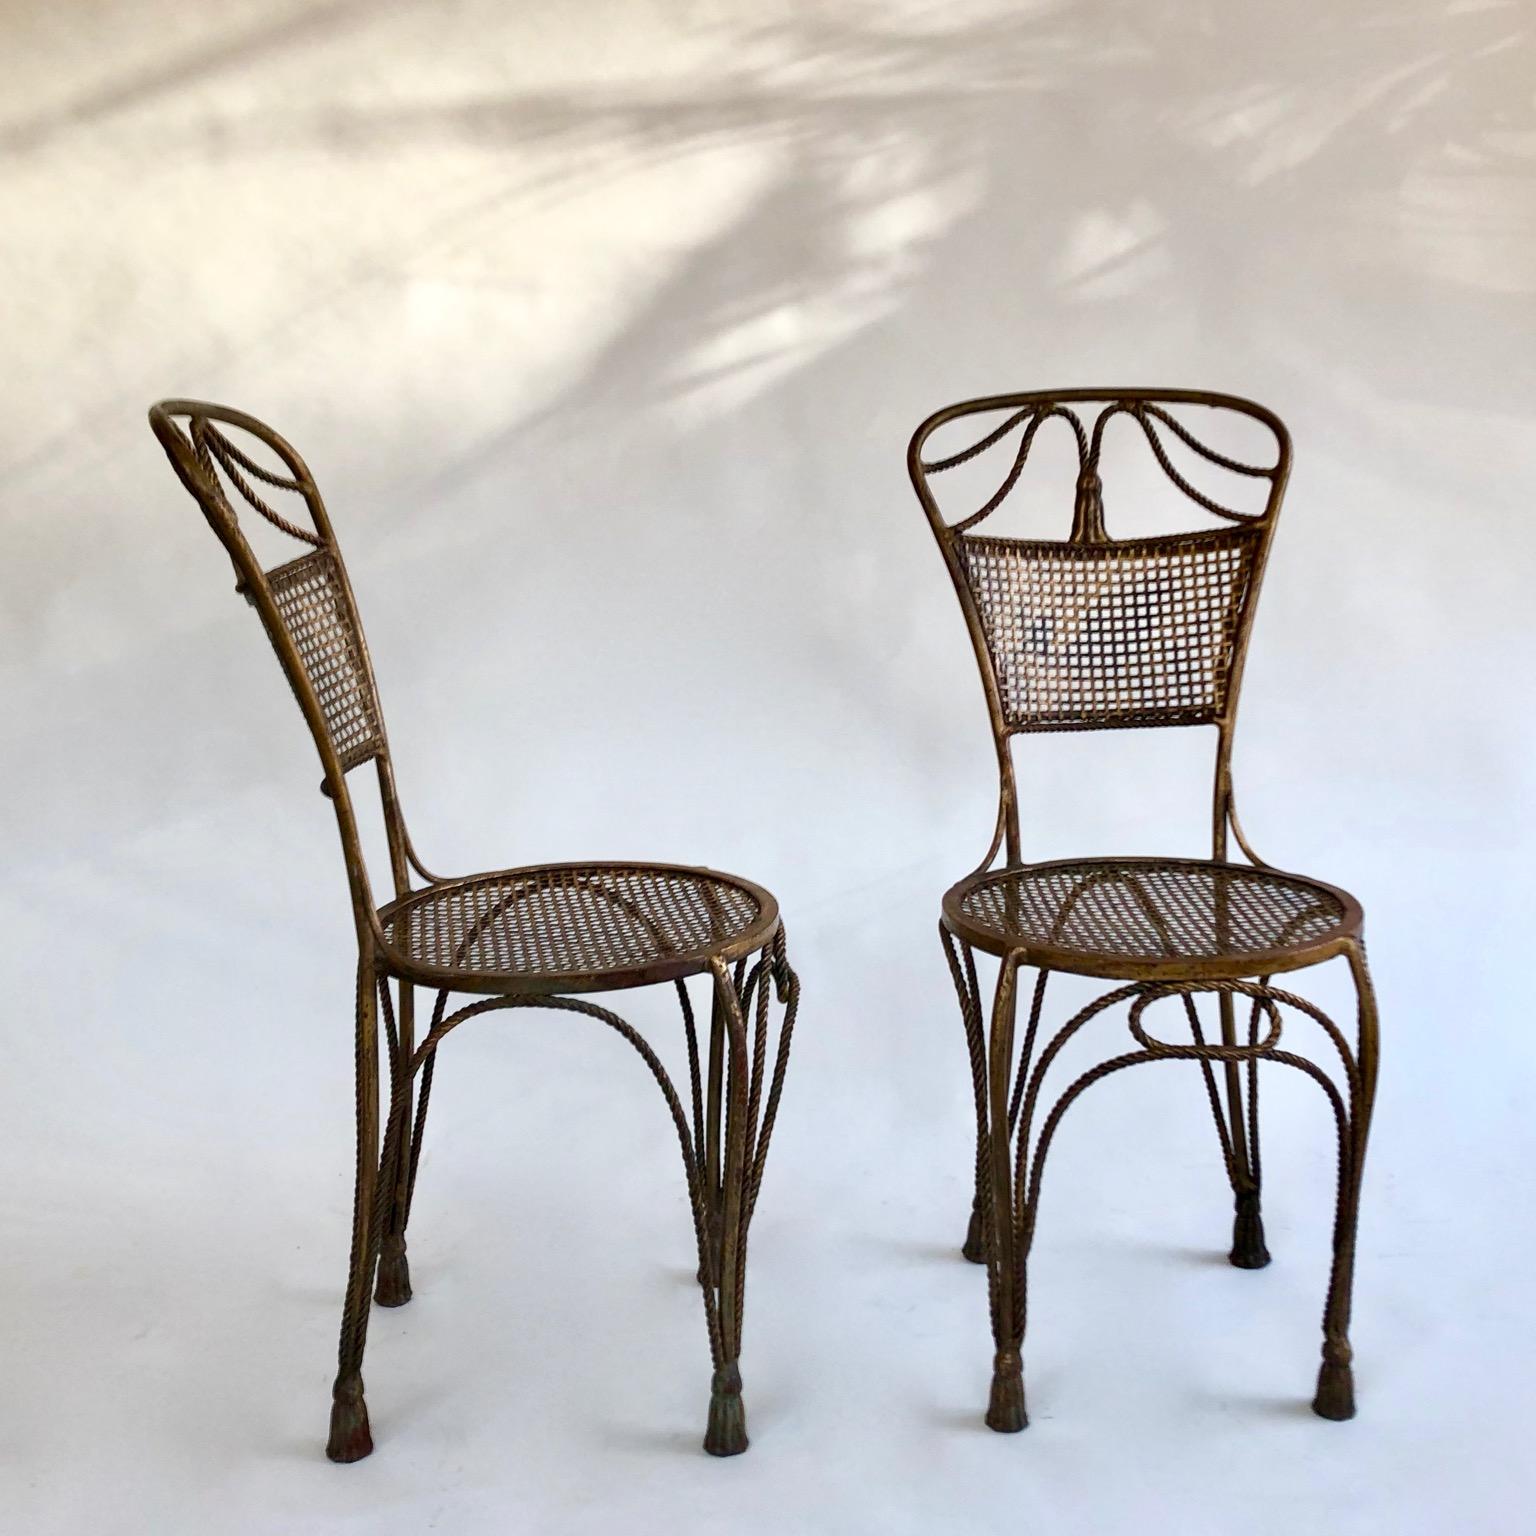 A pair of gilded metal Italian rope and tassel Hollywood Regency chairs, circa 1950s.
4 chairs available, the price is for one pair.